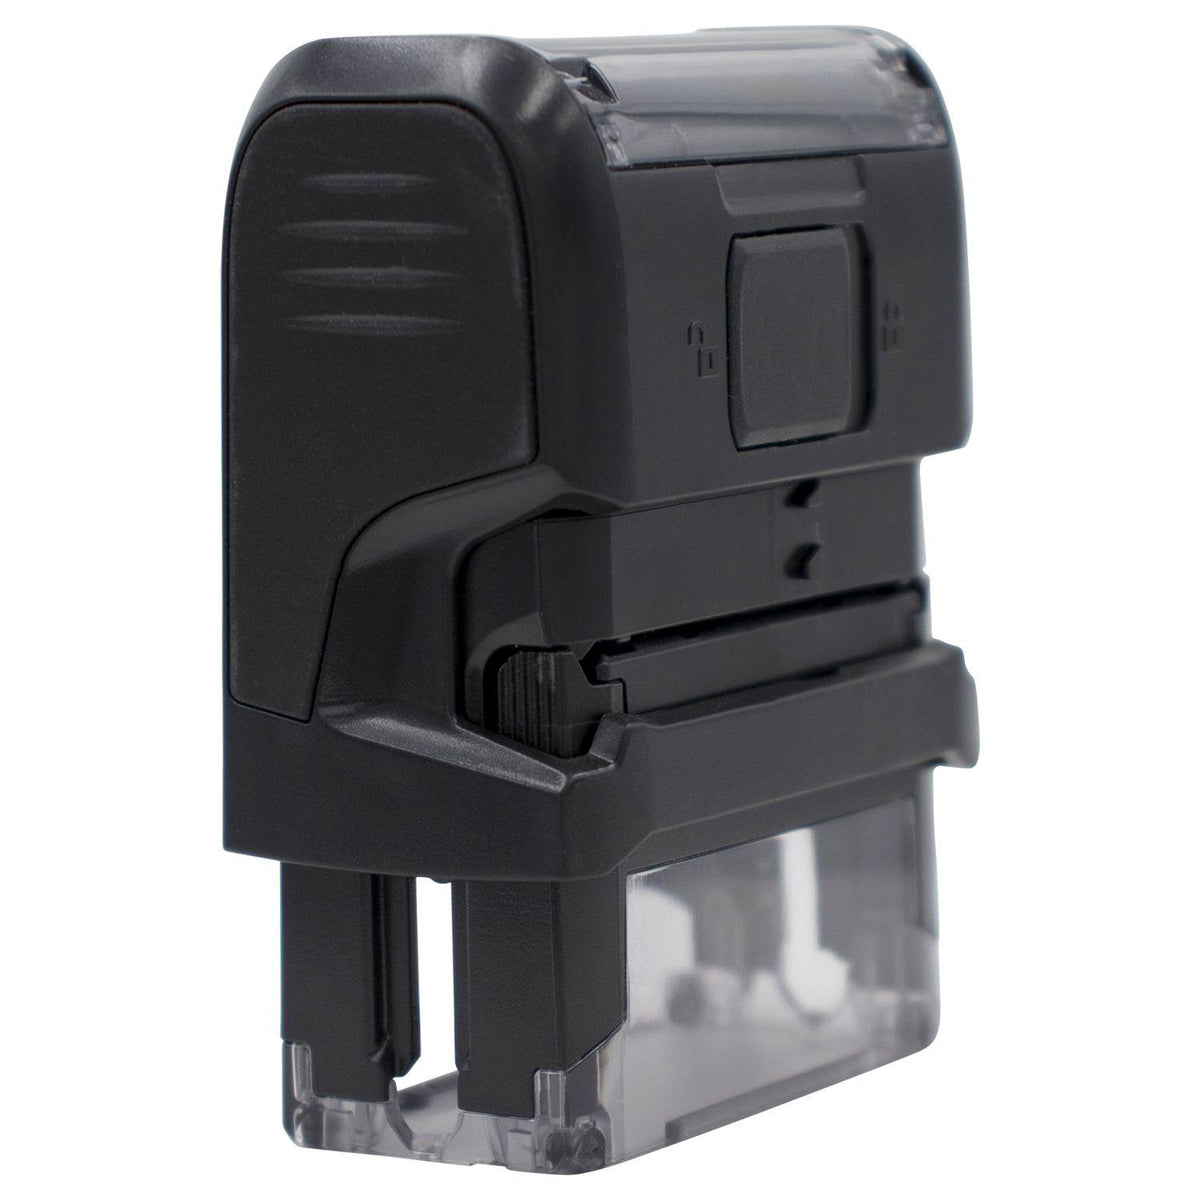 Self-Inking Contact Tracing Stamp - Engineer Seal Stamps - Brand_Trodat, Impression Size_Small, Stamp Type_Self-Inking Stamp, Type of Use_Medical Office